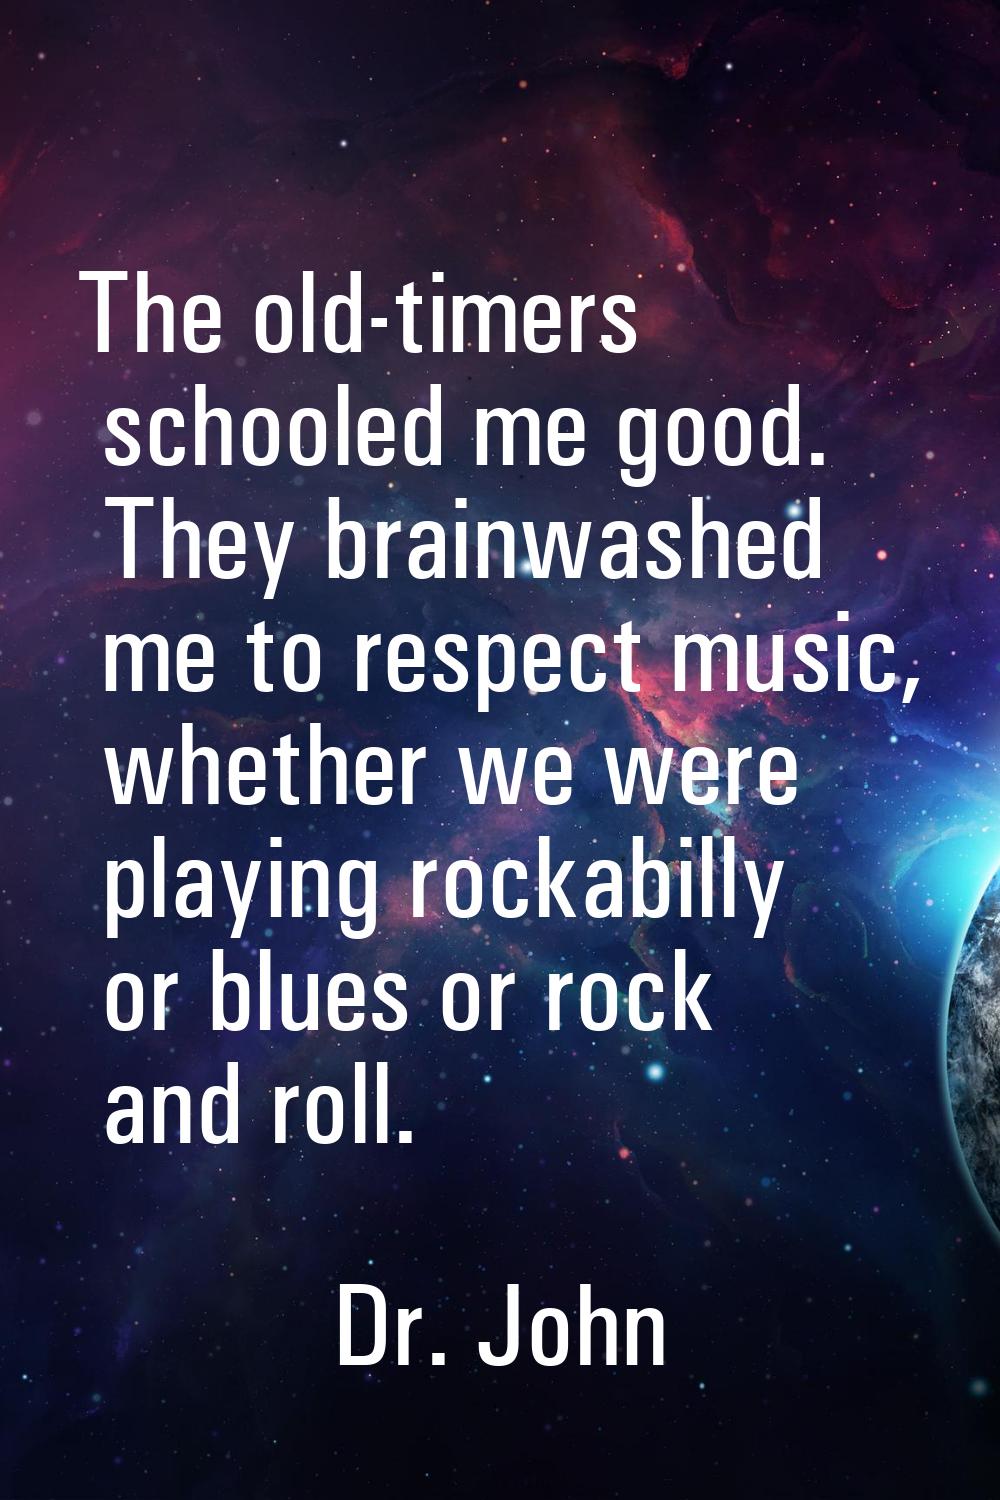 The old-timers schooled me good. They brainwashed me to respect music, whether we were playing rock